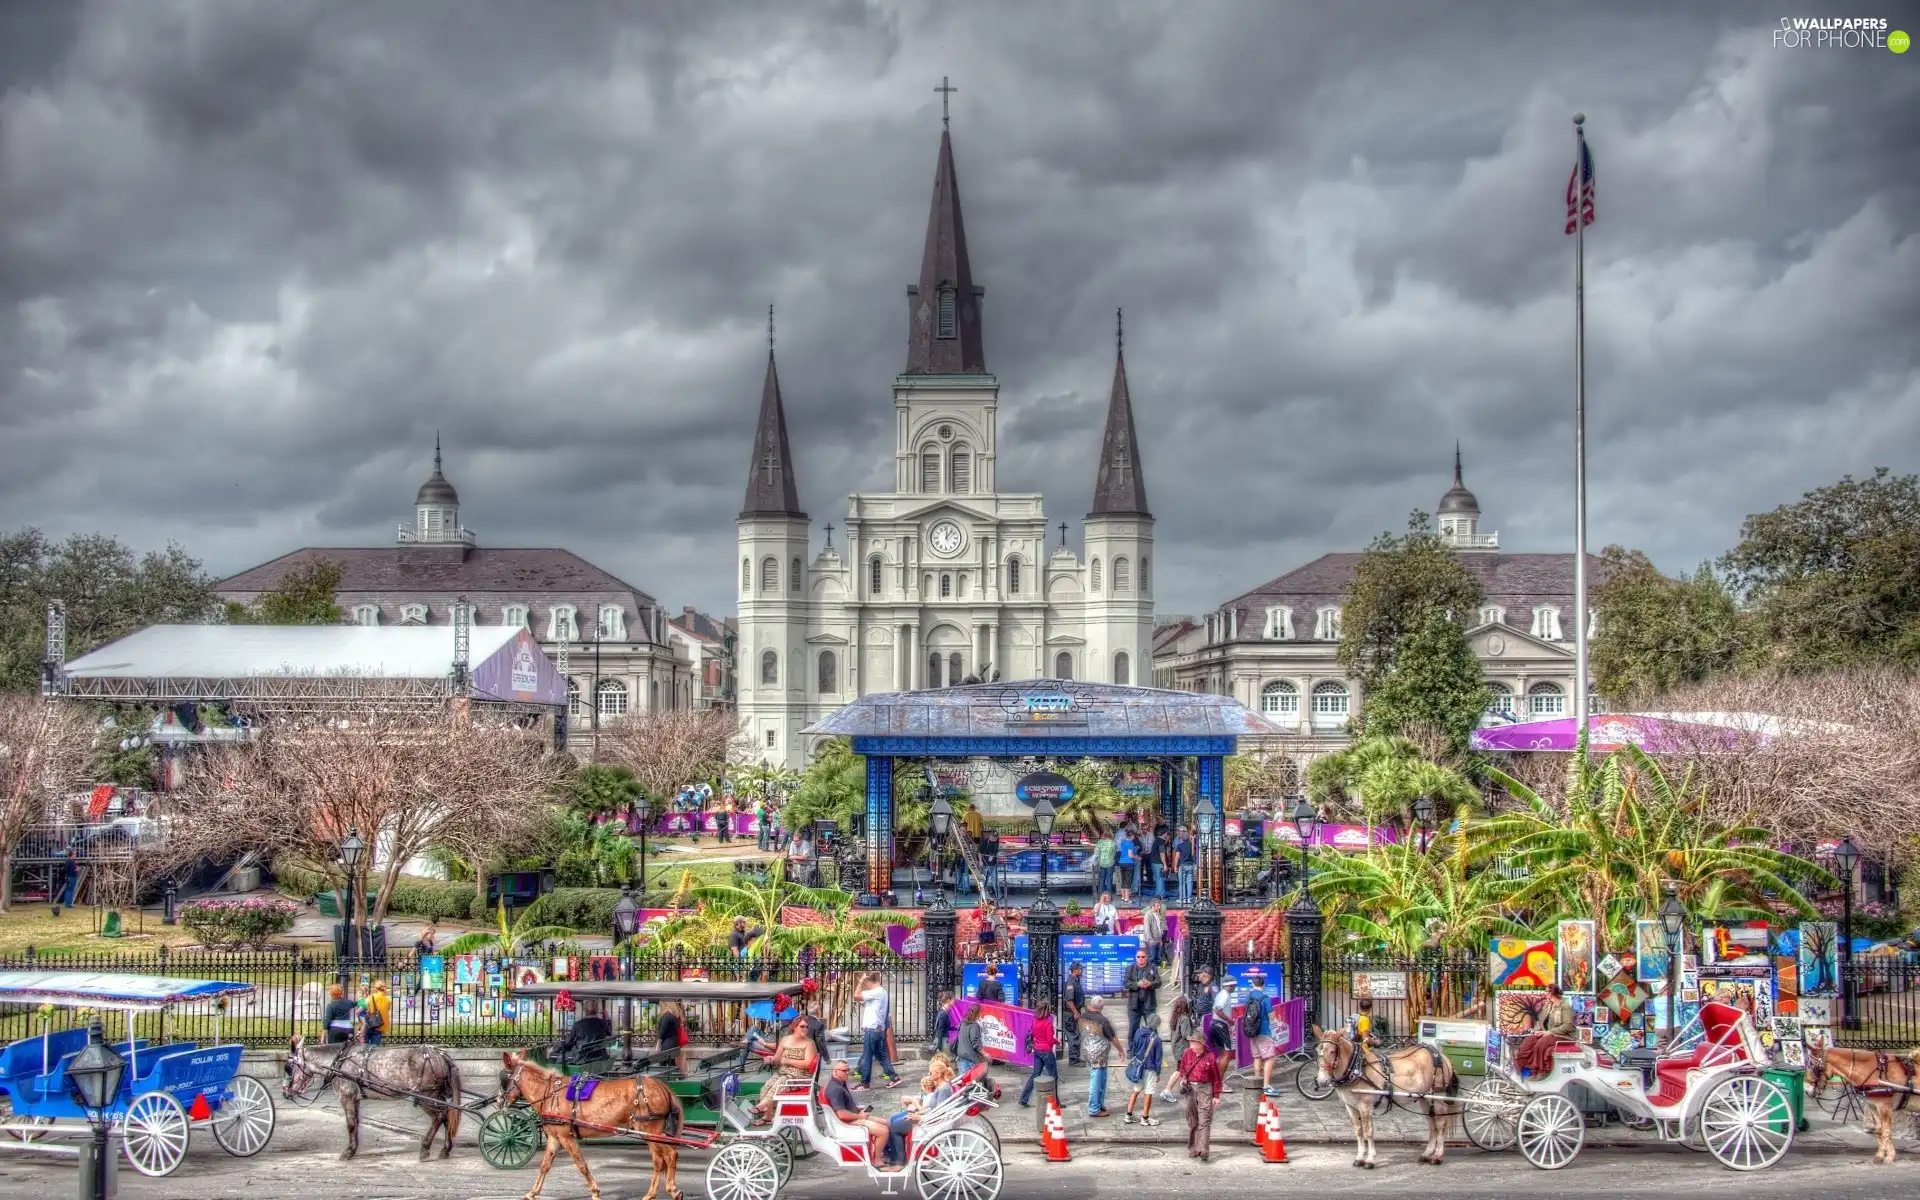 Church, Scene, New Orleans, carriages